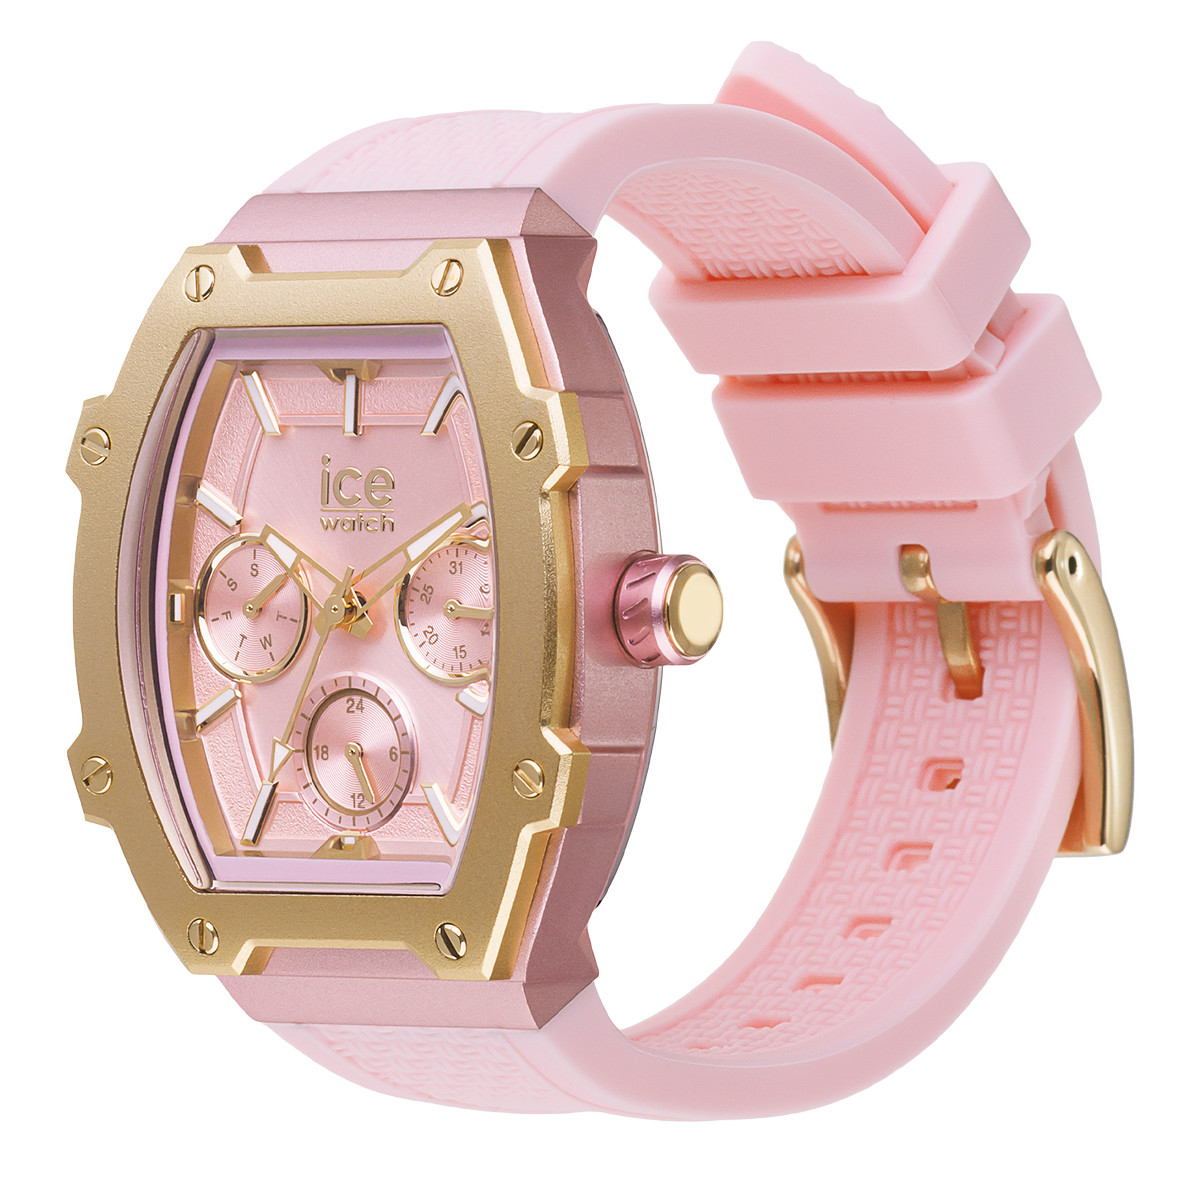 Montre ICE WATCH Ice boliday femme bracelet silicone rose - vue D1